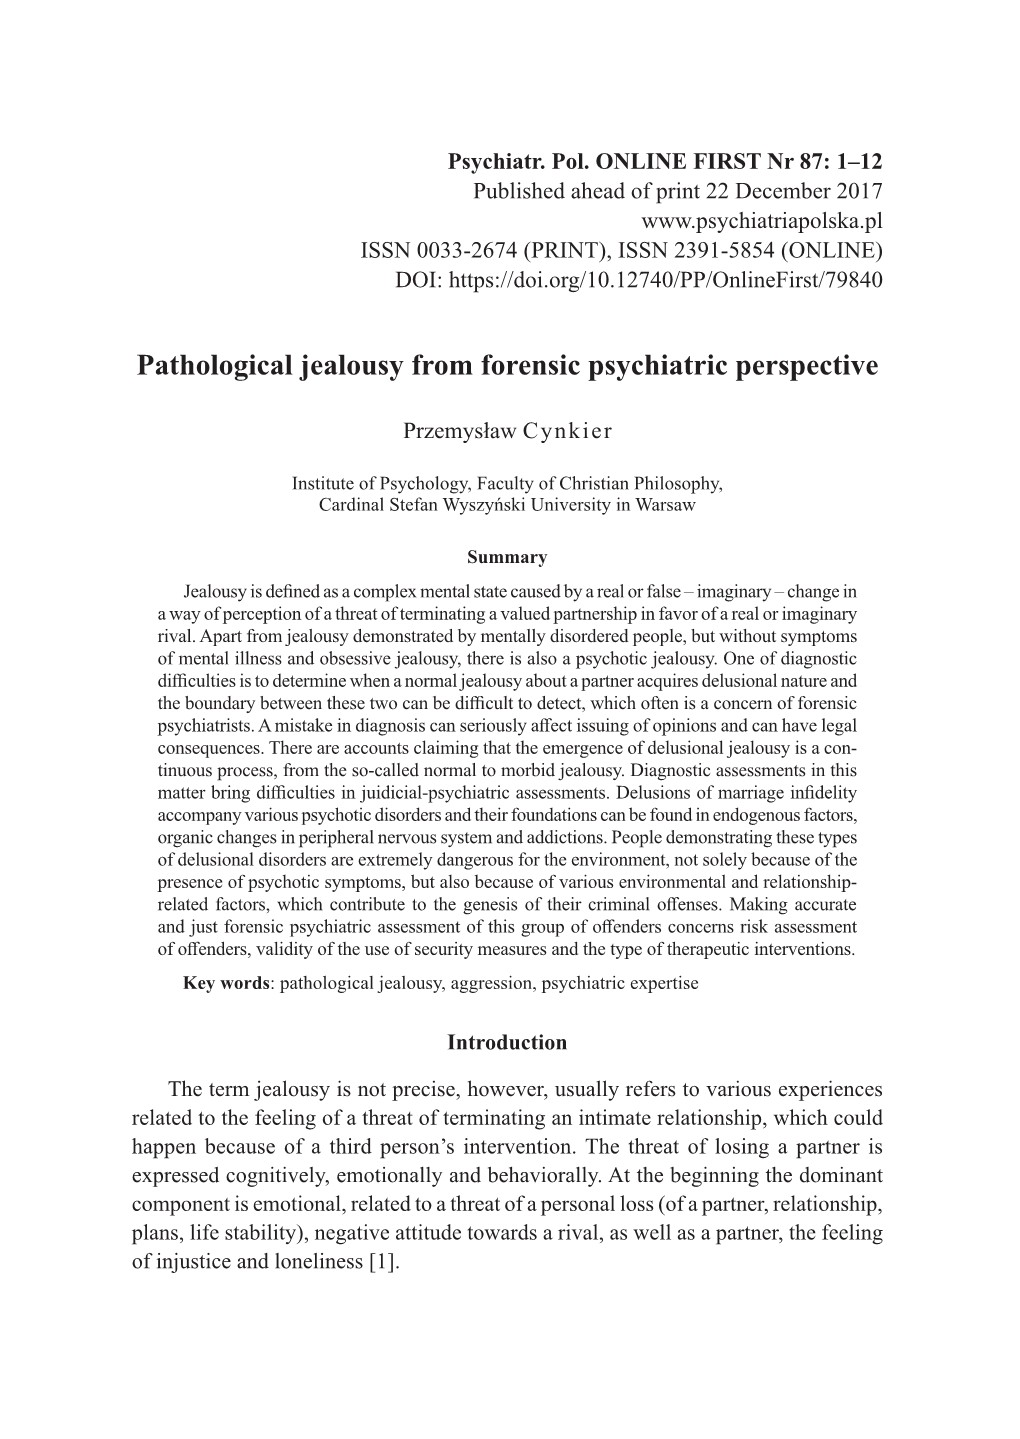 Pathological Jealousy from Forensic Psychiatric Perspective